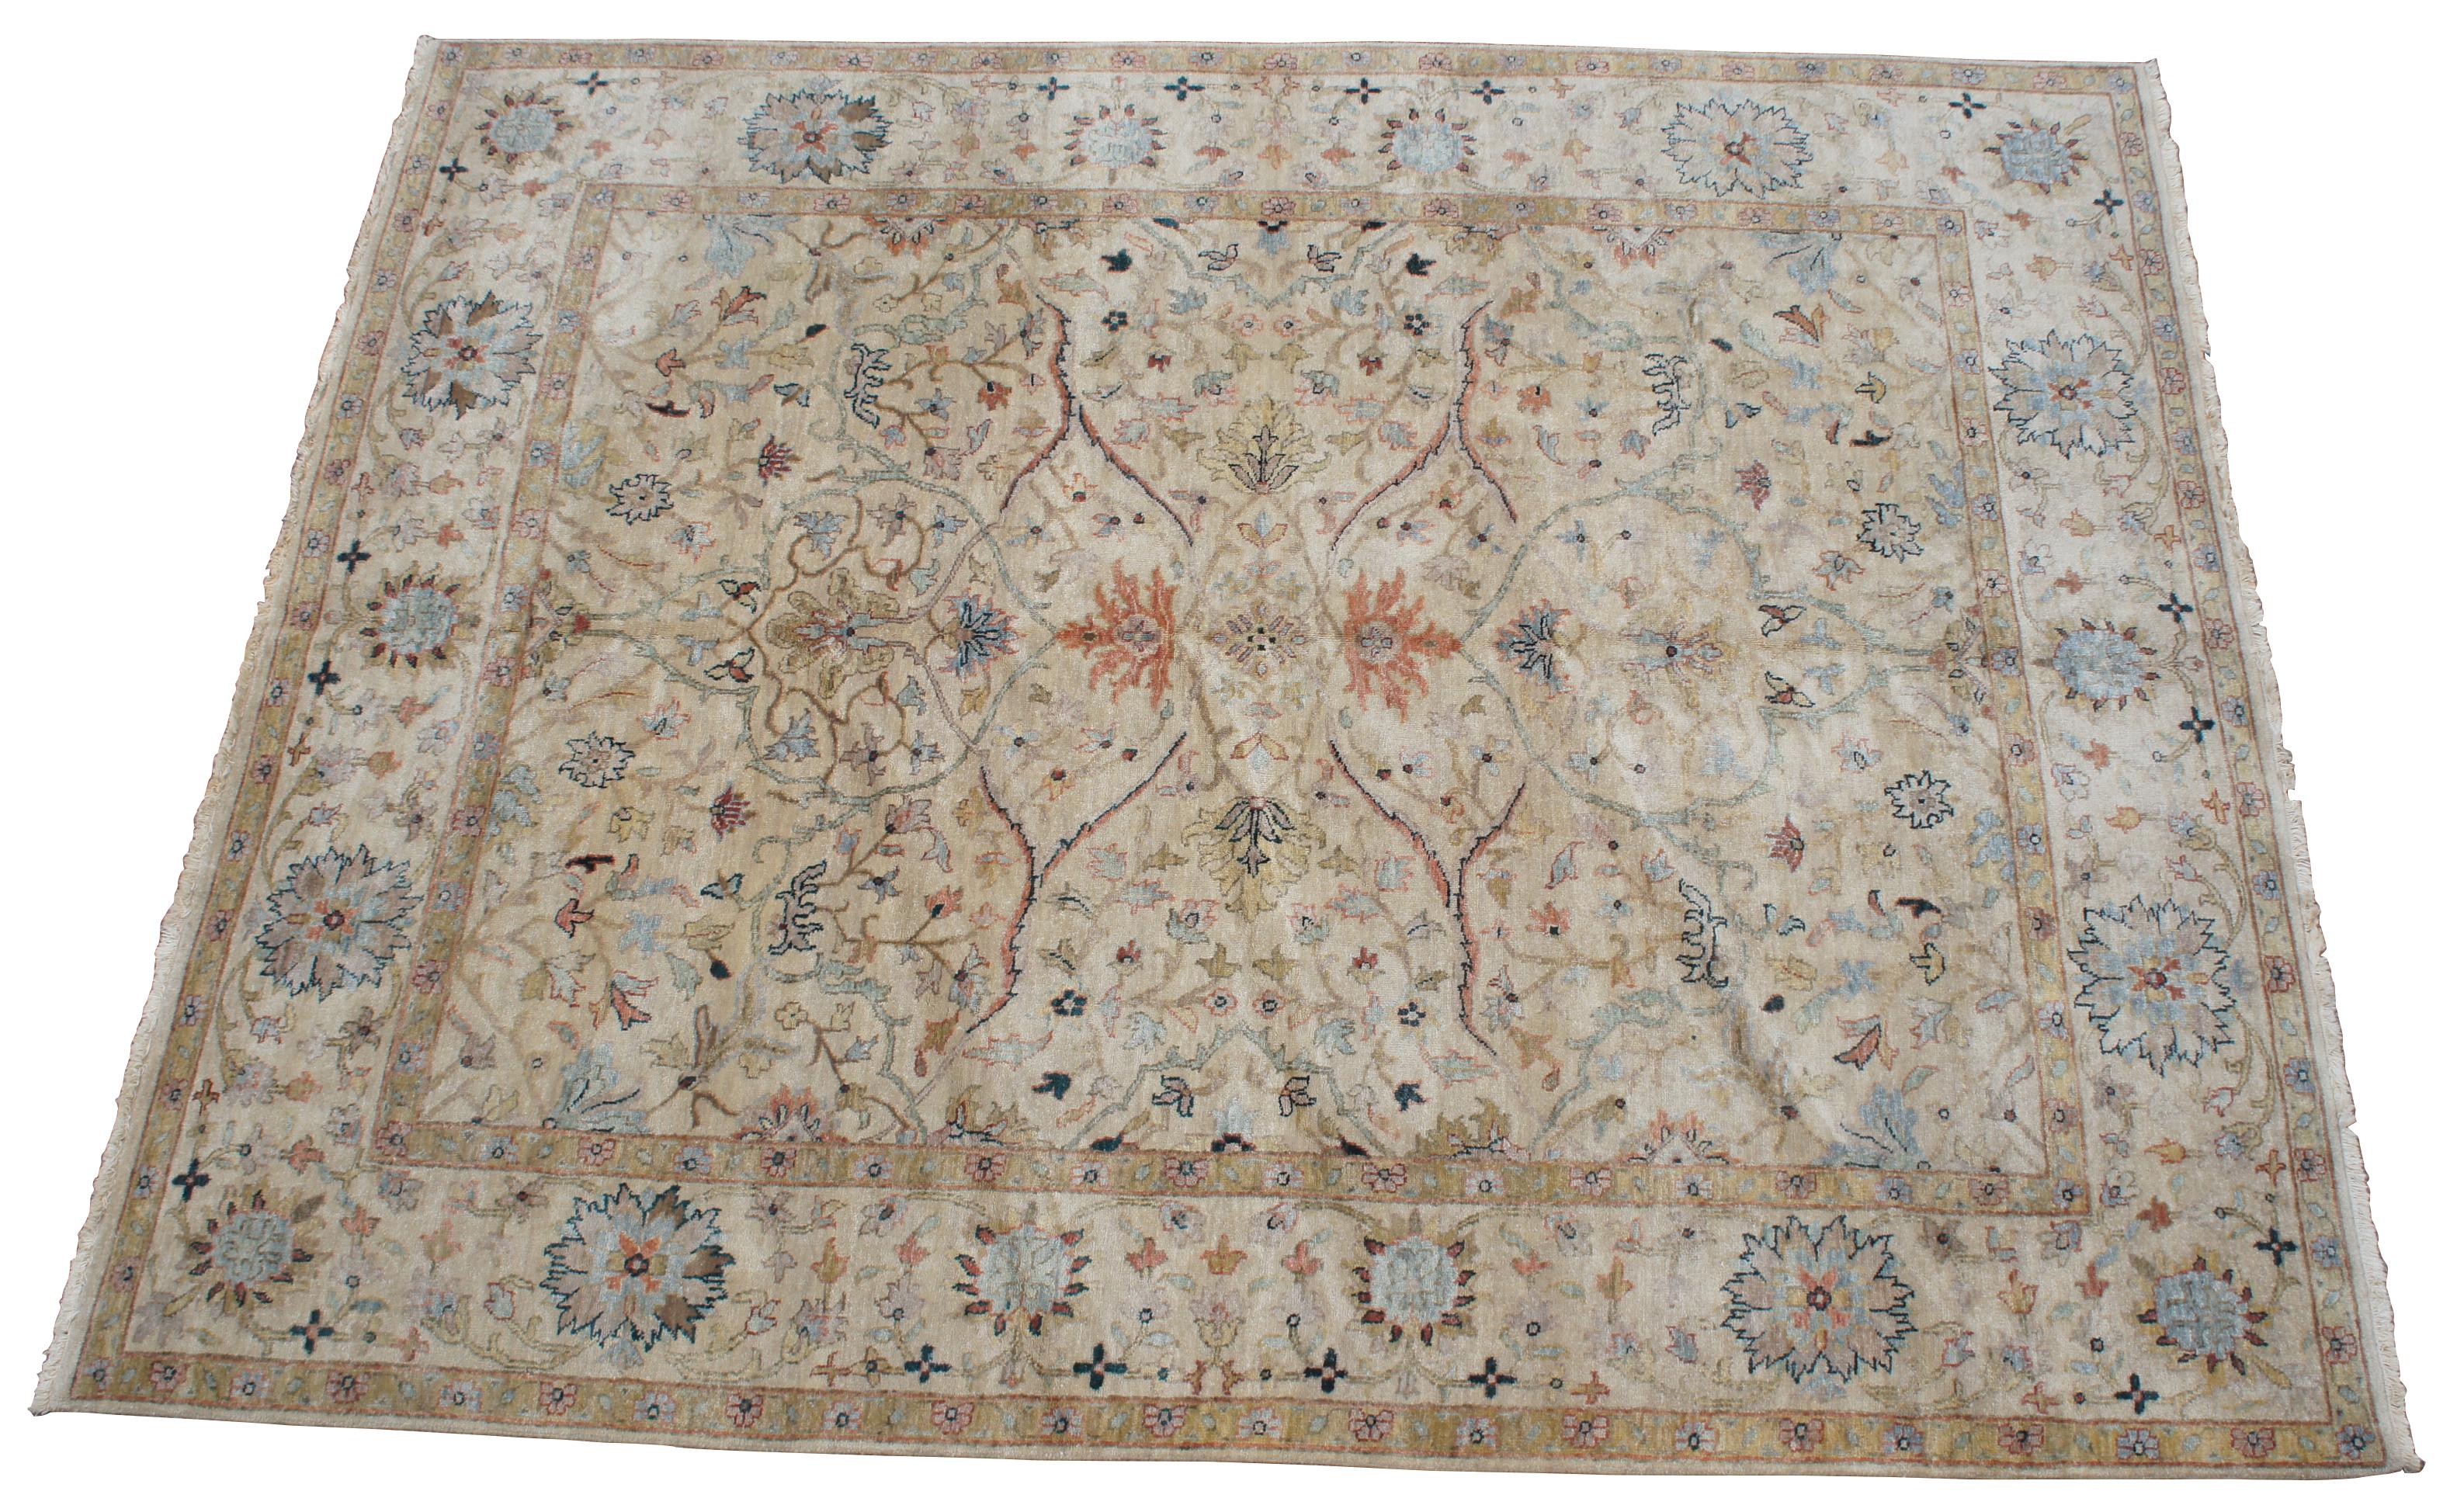 Vintage floral all-over area rug. Features beige / tan, reds / pinks, greens, blues. Measures: 8' x 10'.
 